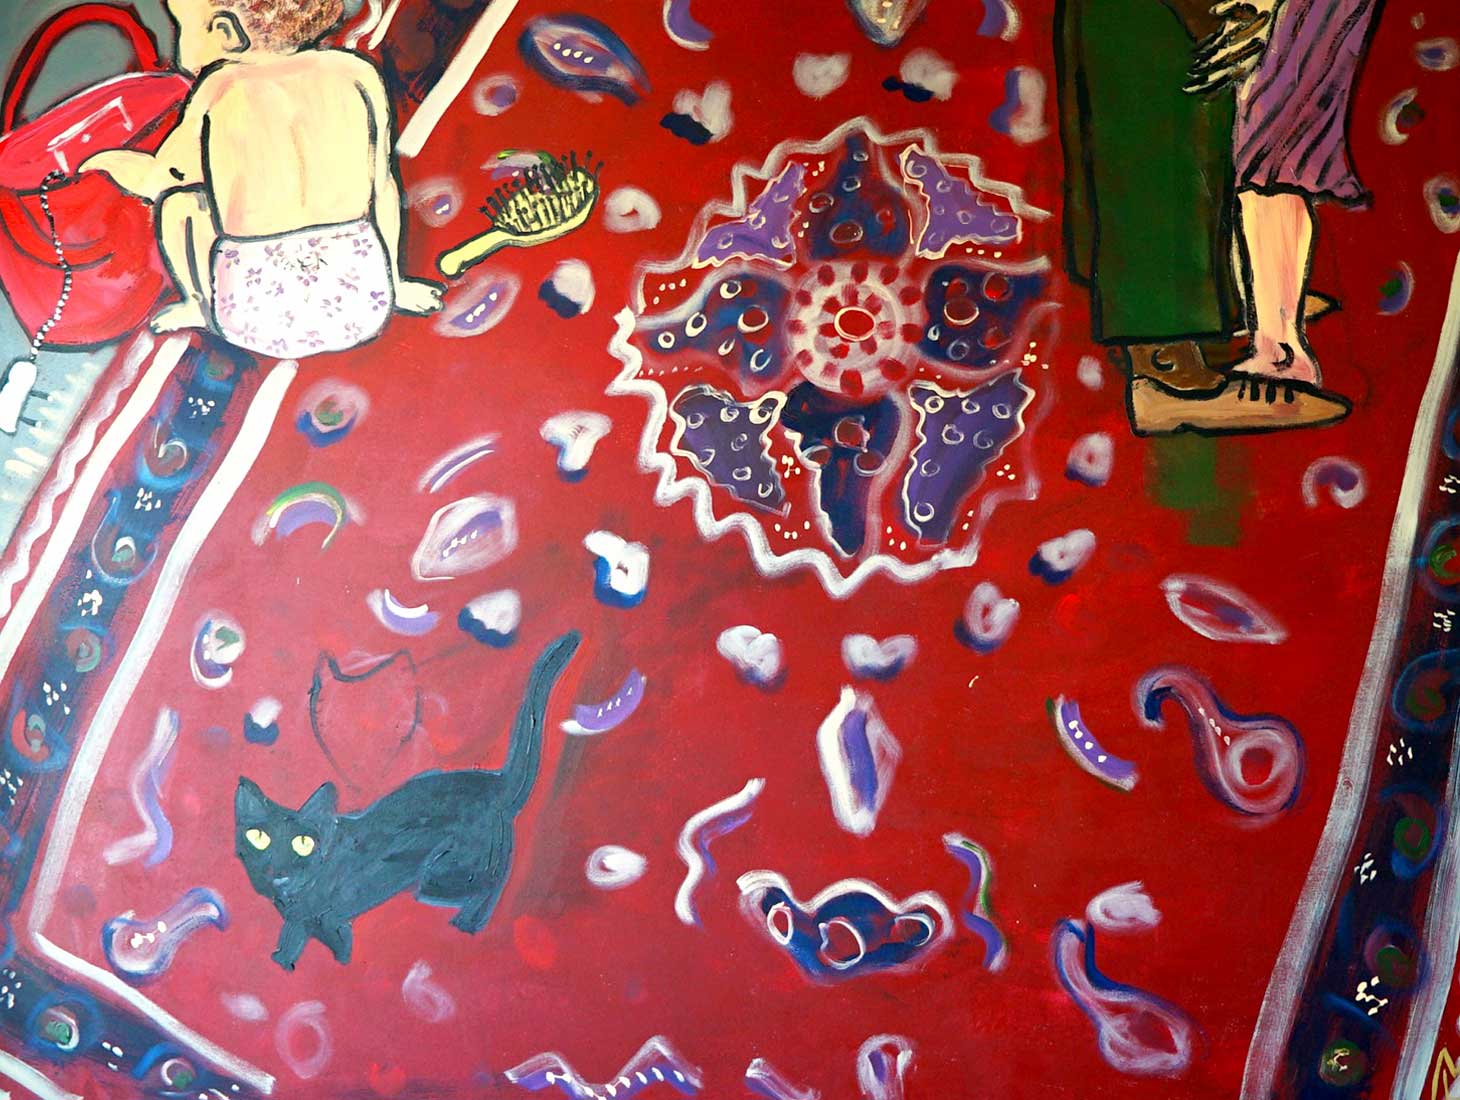 dancing couple with cat and child on the carpet